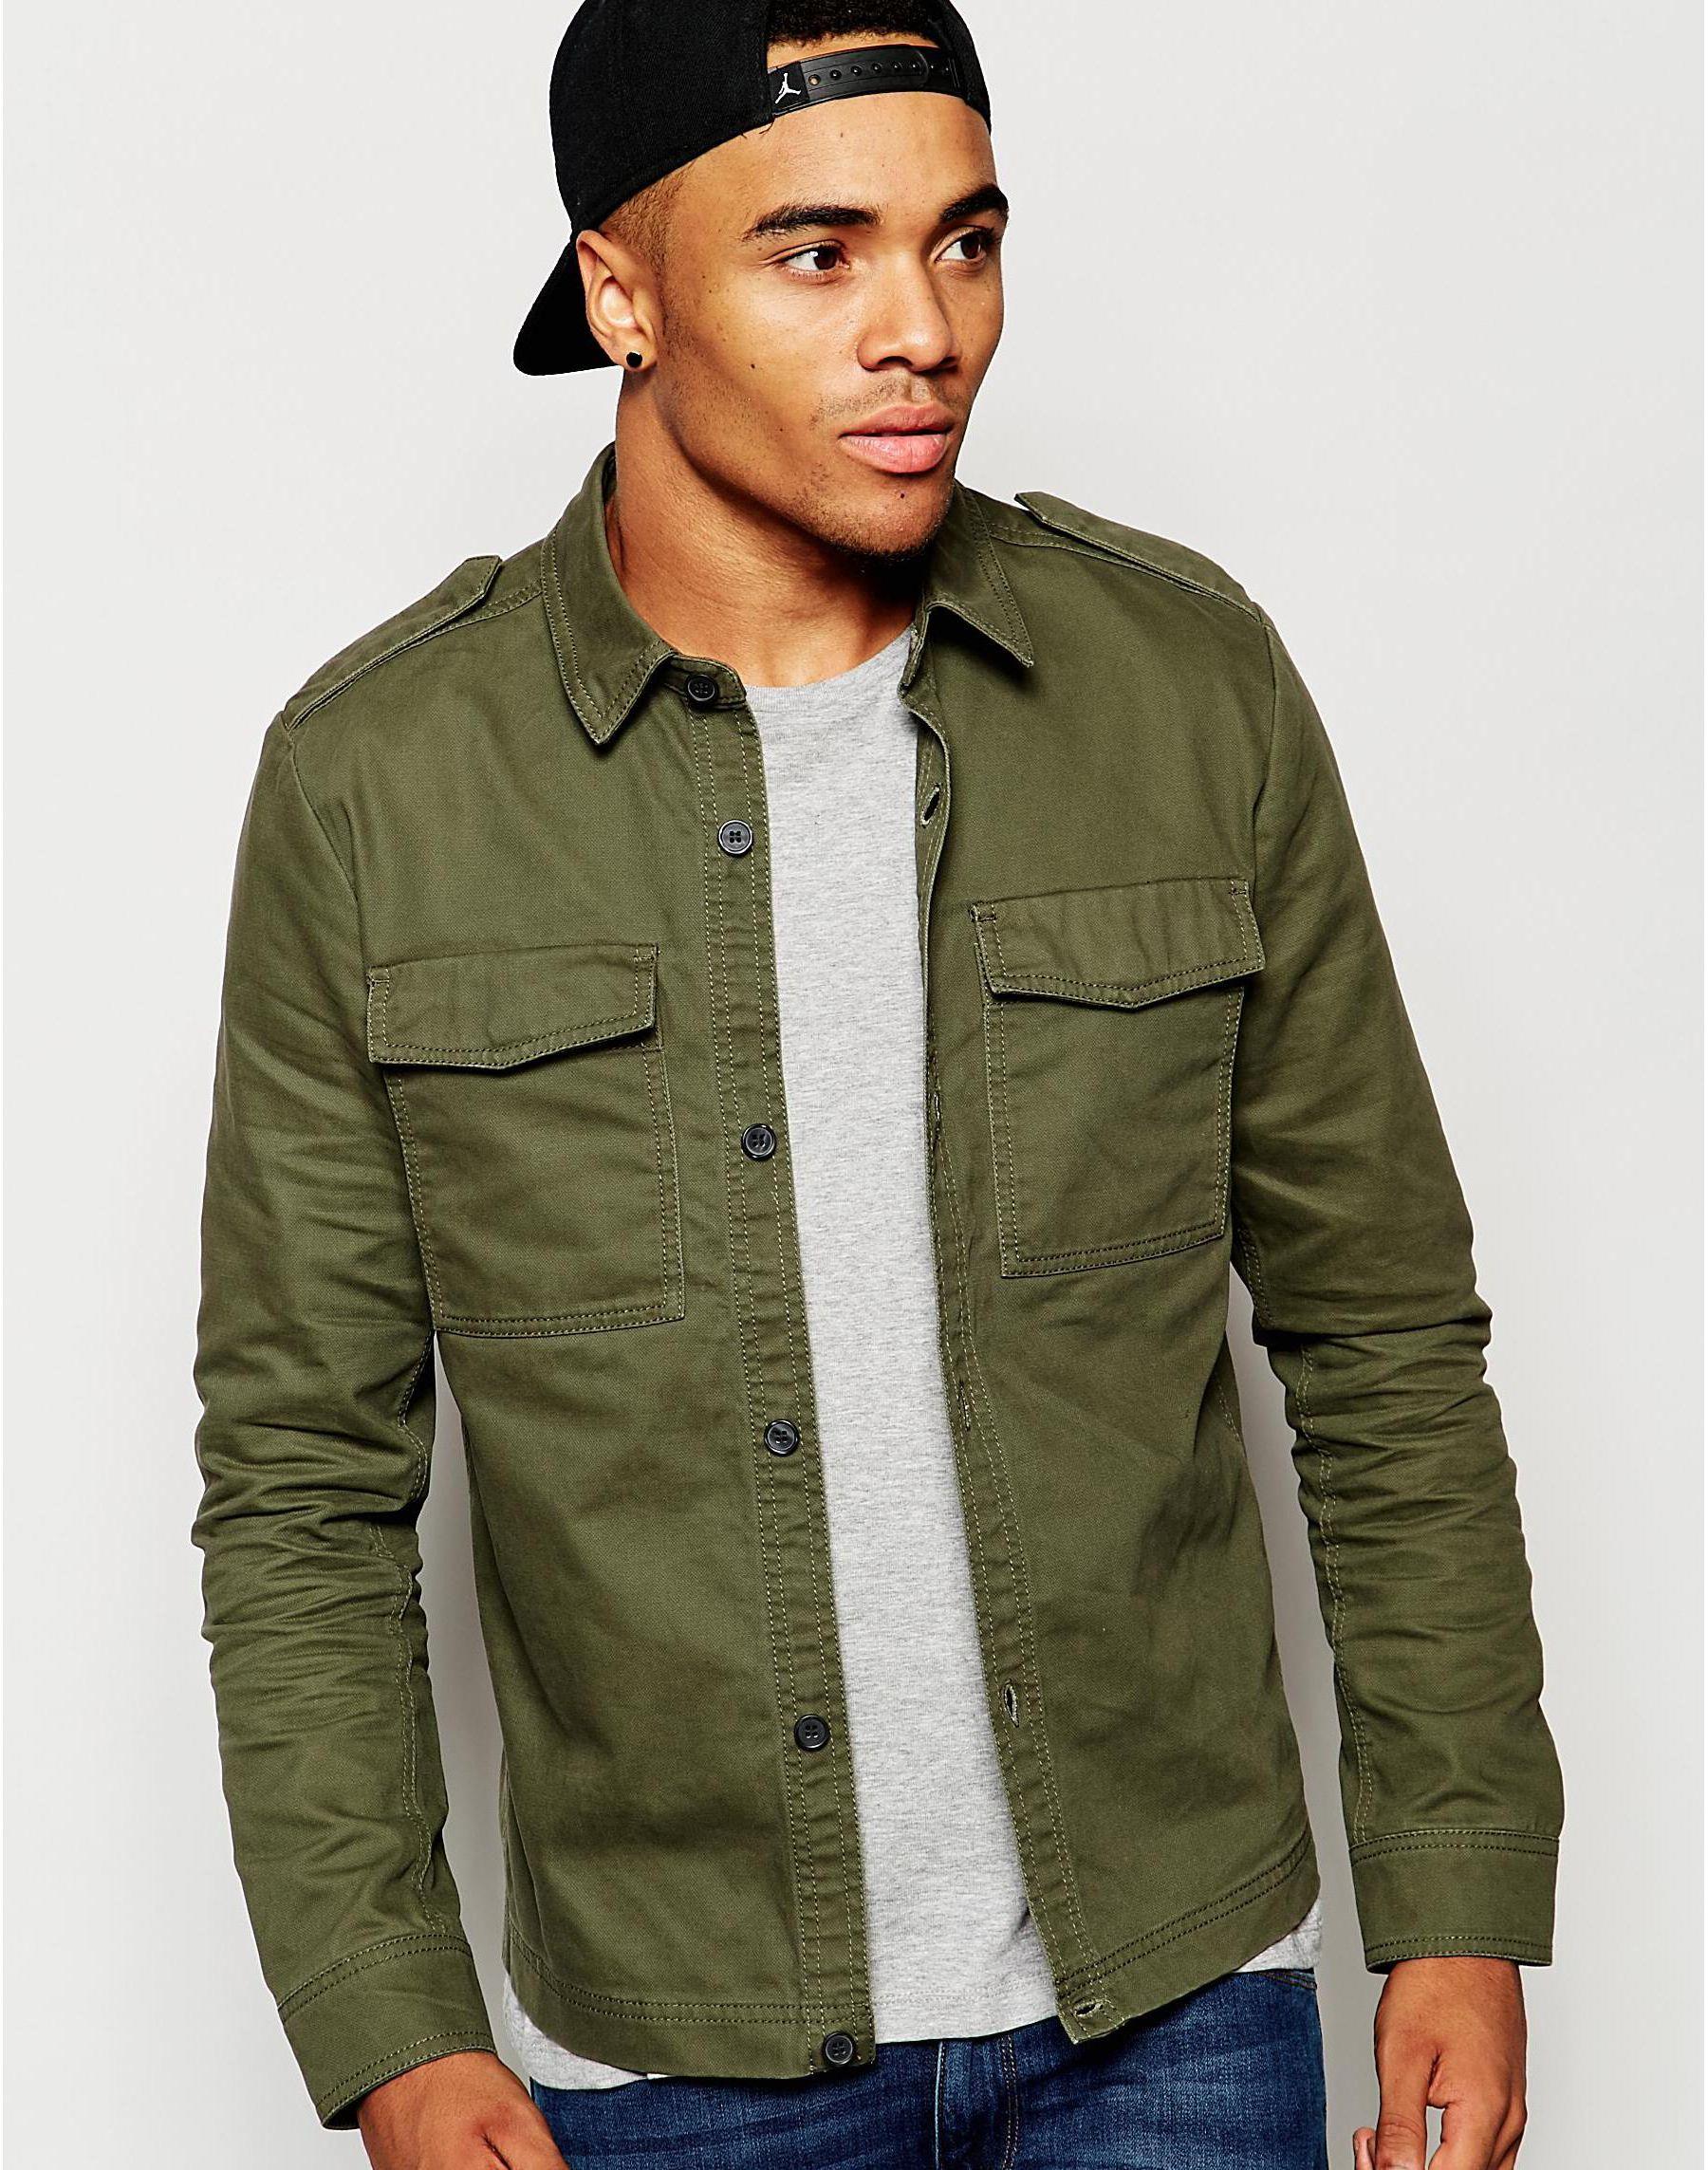 Lyst New Look Military Jacket  in Green for Men